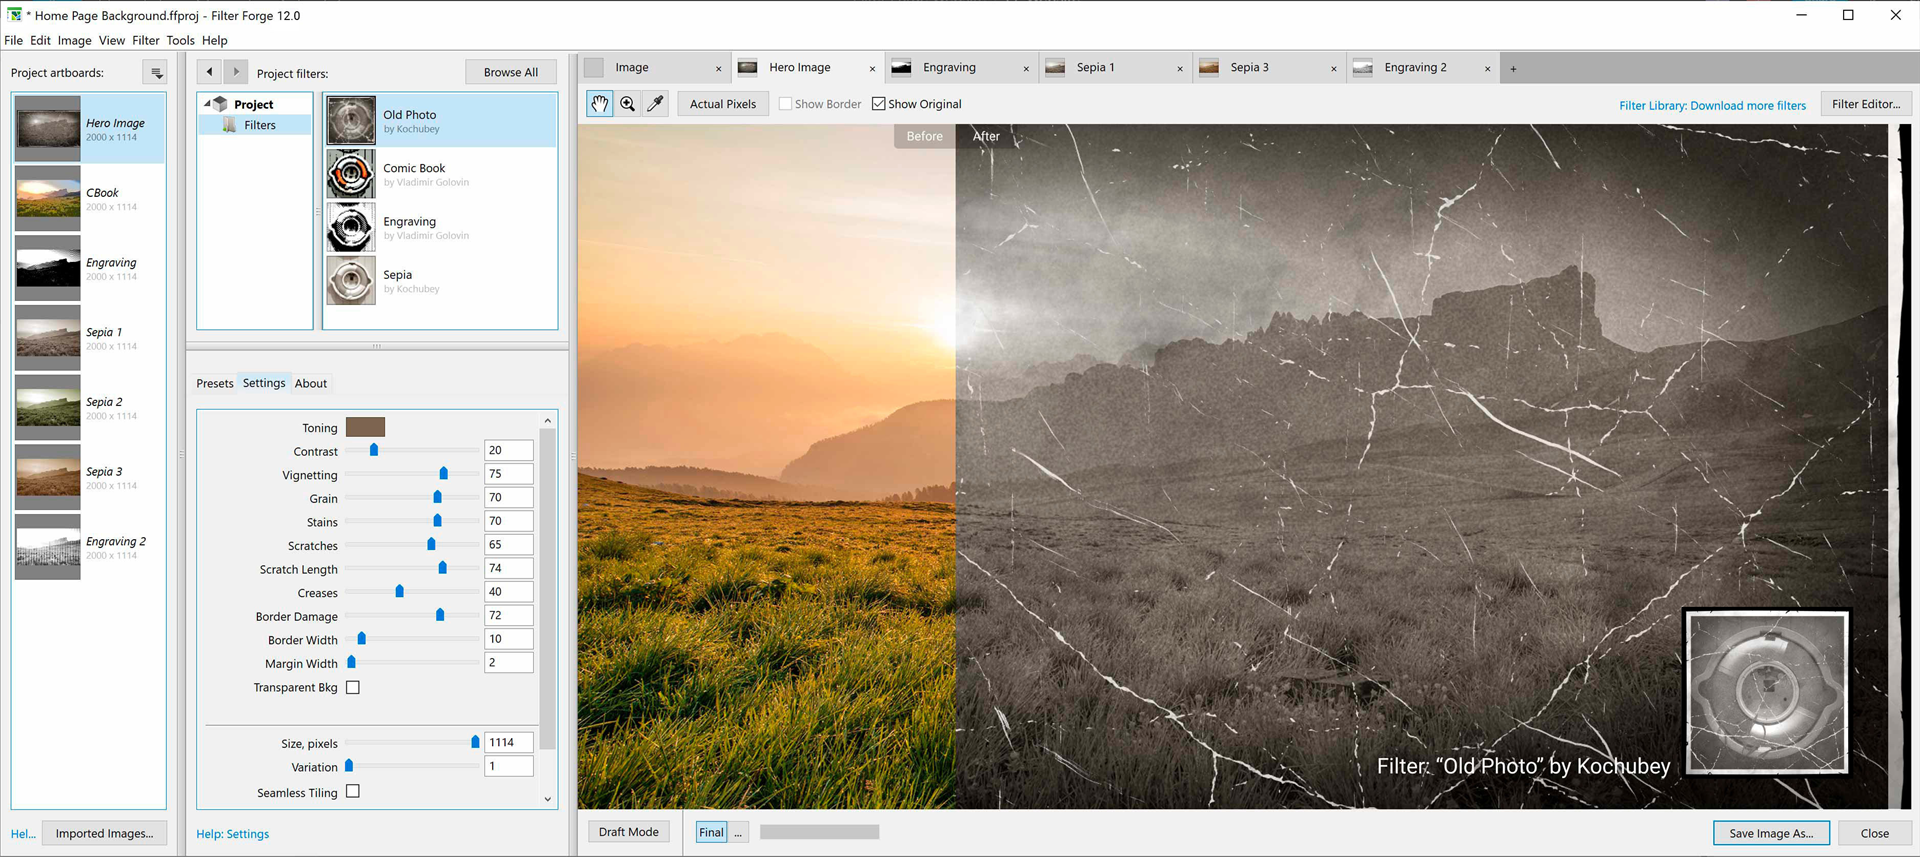 Filter Forge Professional Edition, Design, Photo & Graphics Software Screenshot